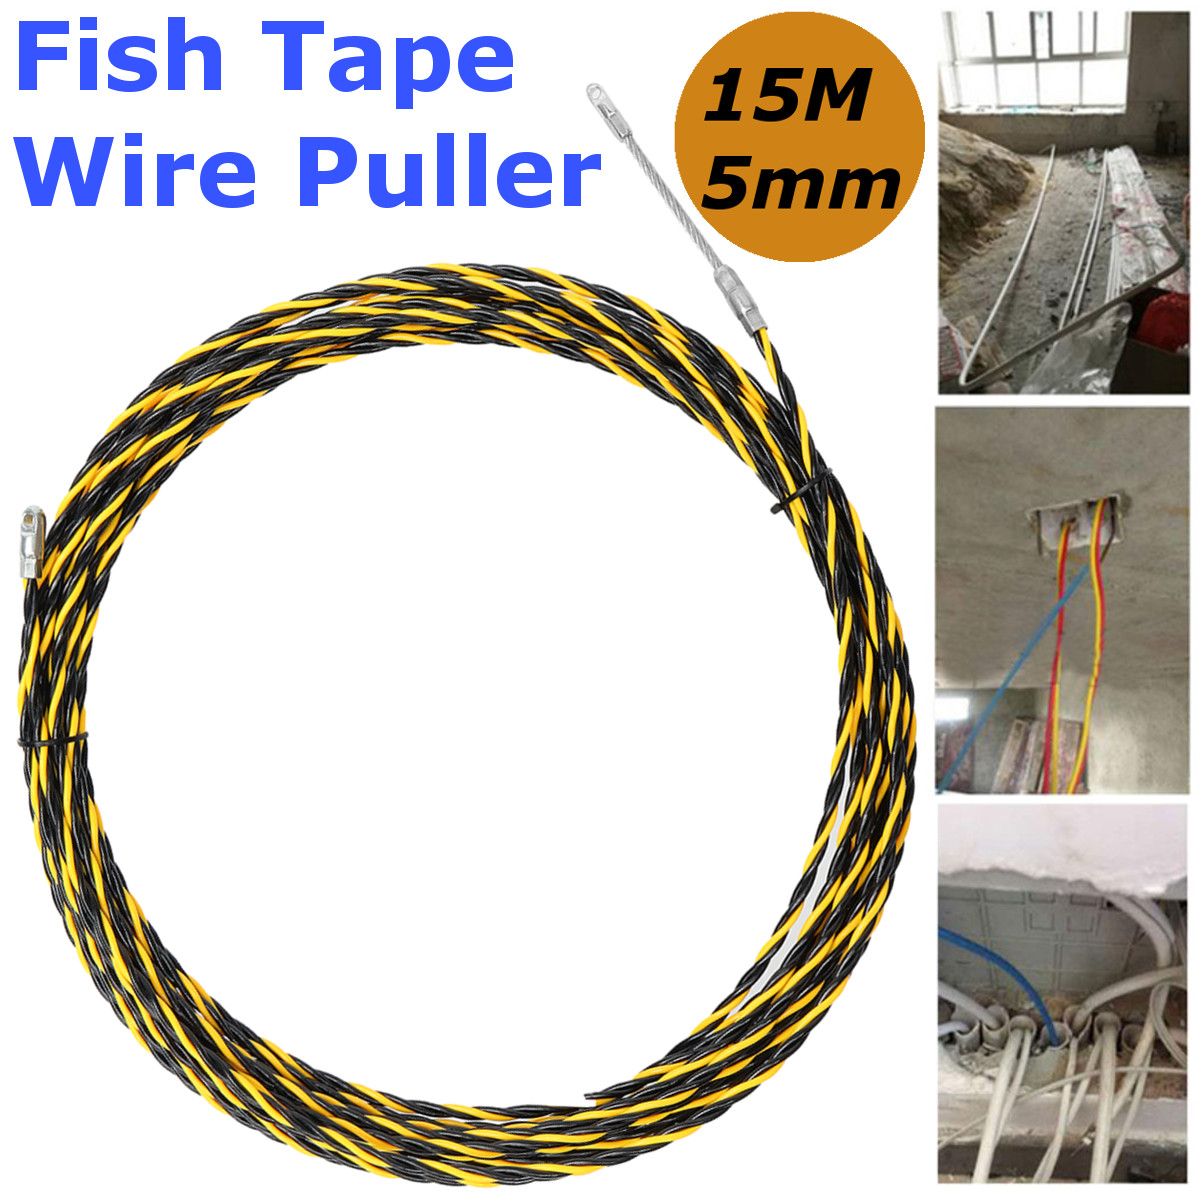 15M-5mm-Spiral-Cable-Puller-Conduit-Snake-Cable-Rodder-Fish-Tape-Wire-Guide-1323138-2